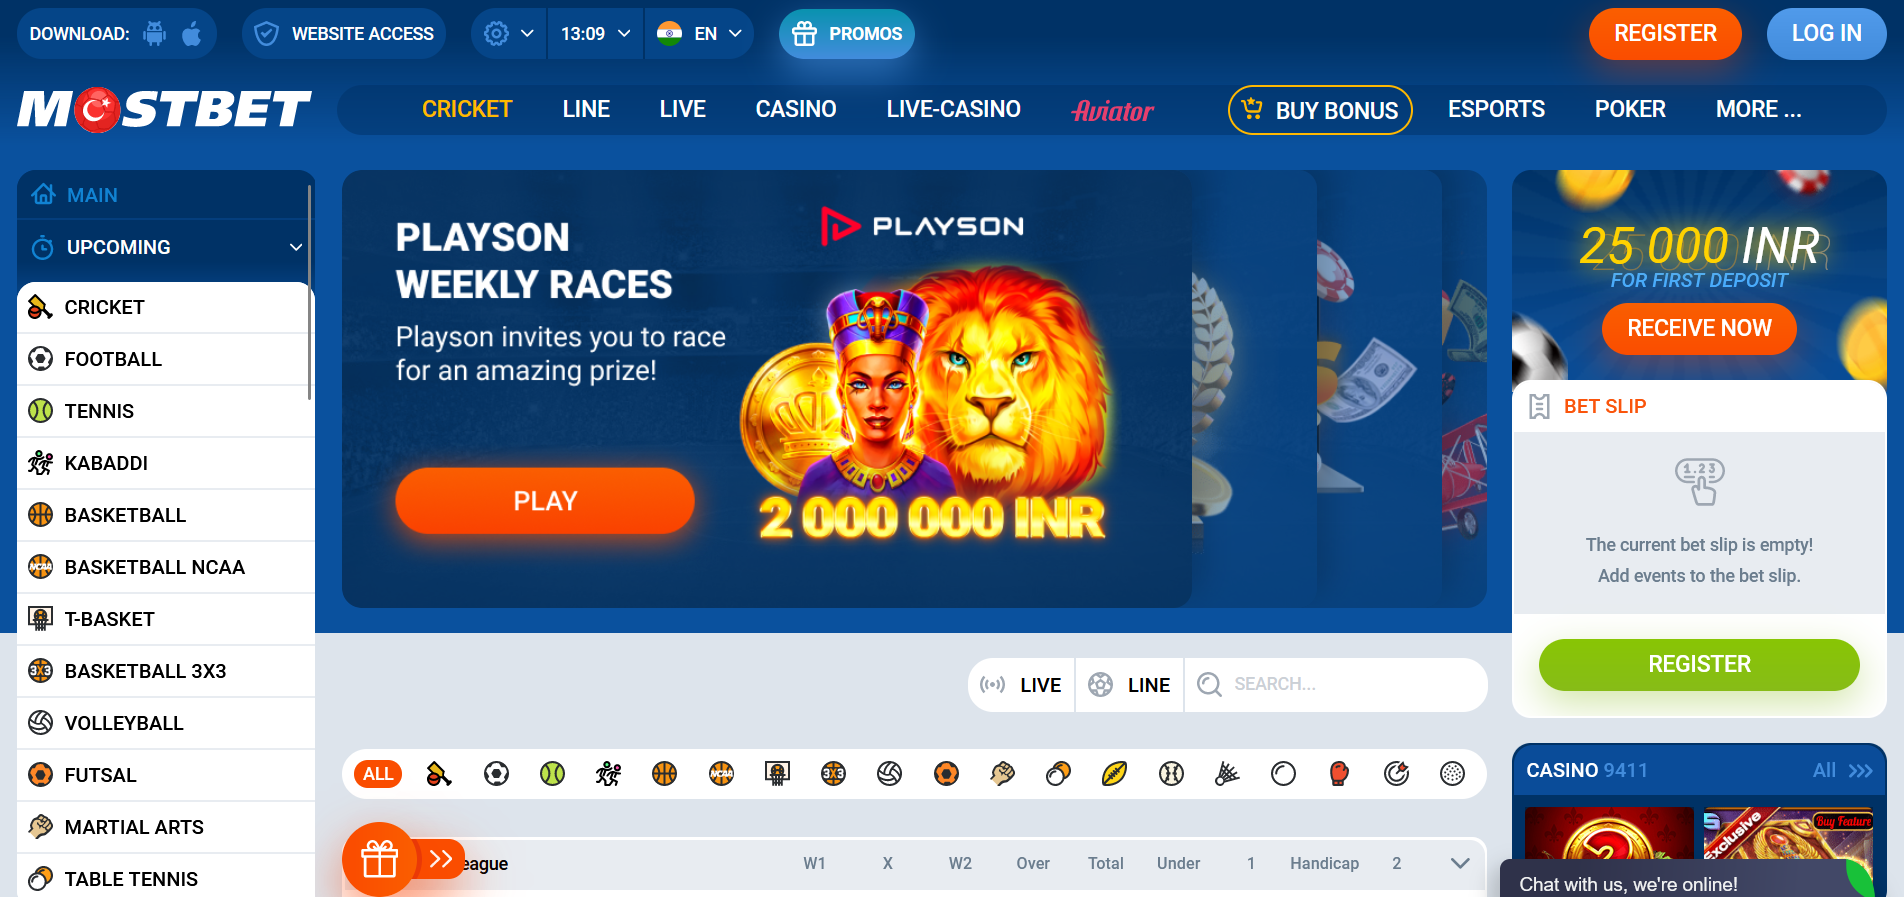 Crazy Mostbet Bookmaker and Online Casino in India: Lessons From The Pros